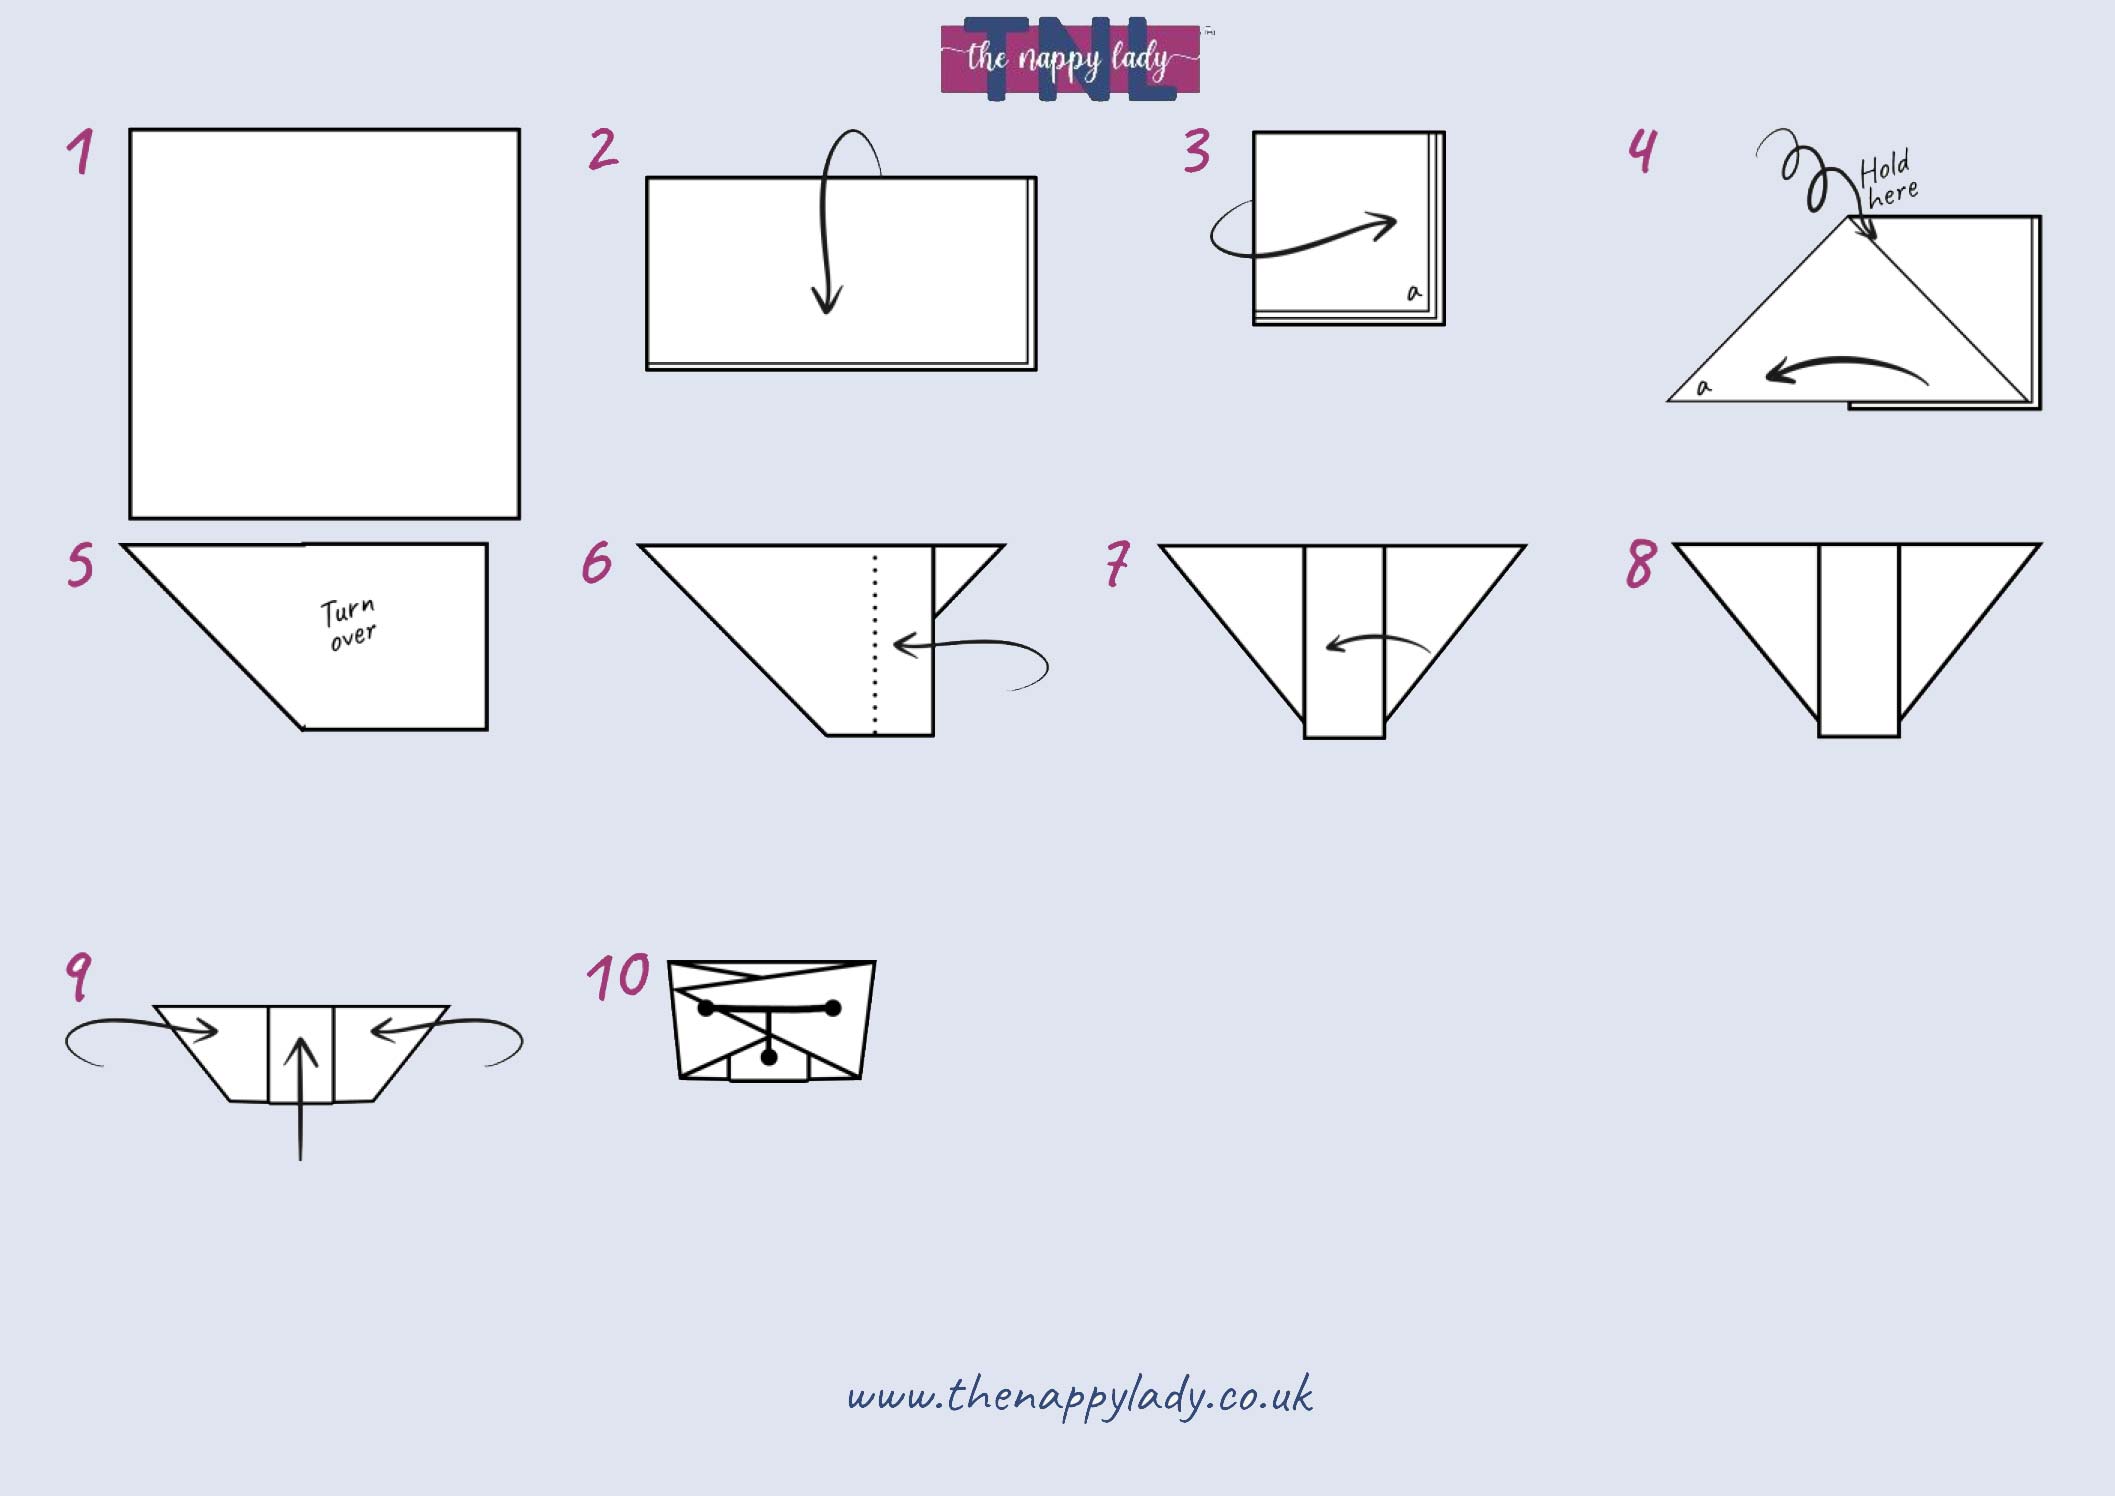 folding guide for the bat terry nappy fold